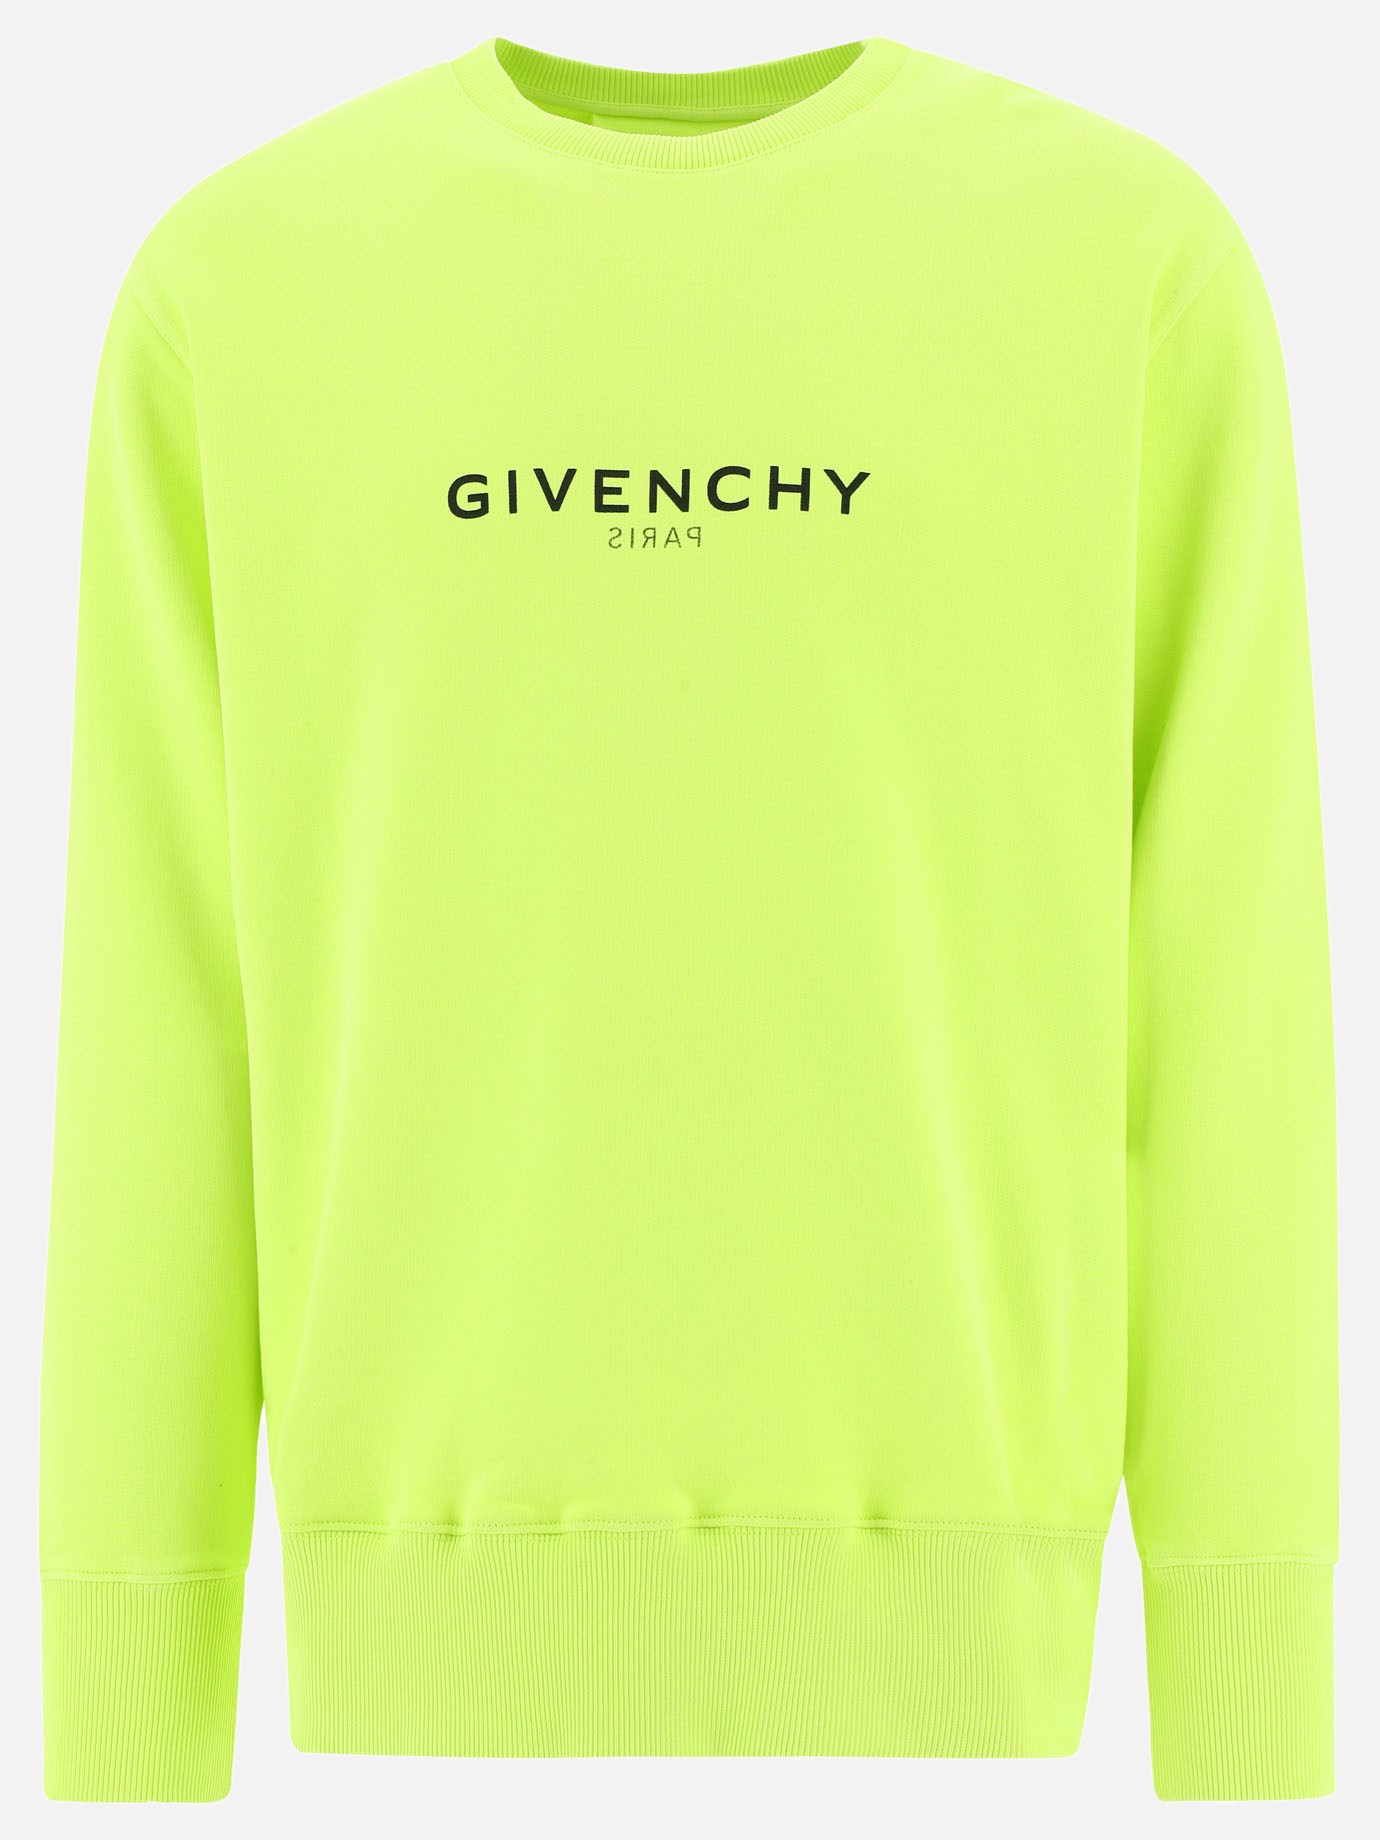  Reverse  sweatshirtby Givenchy - 2